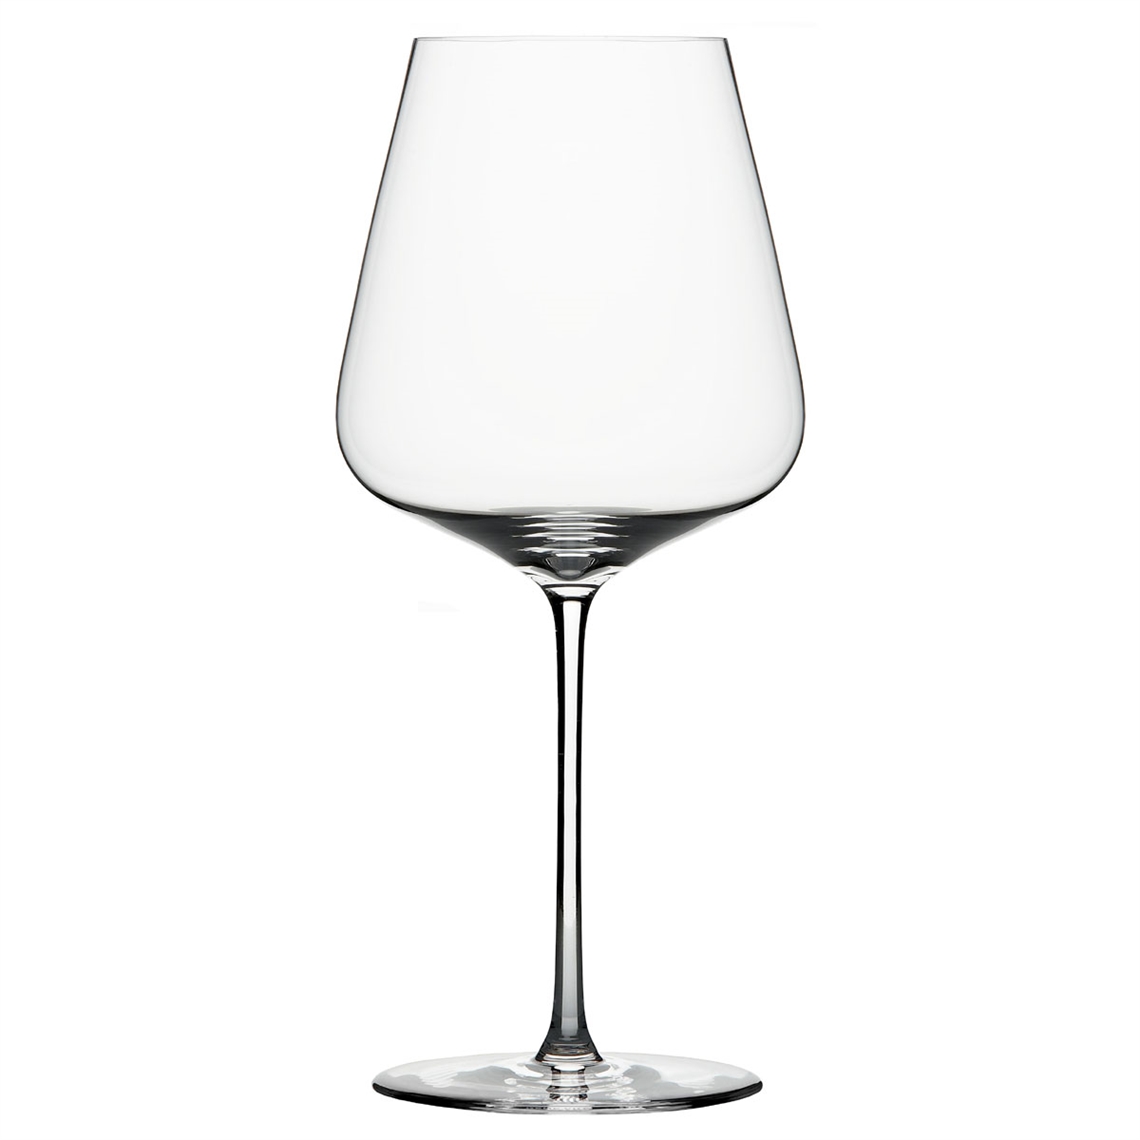 View more schott zwiesel tritan crystal glass from our Premium Mouth Blown Glassware range